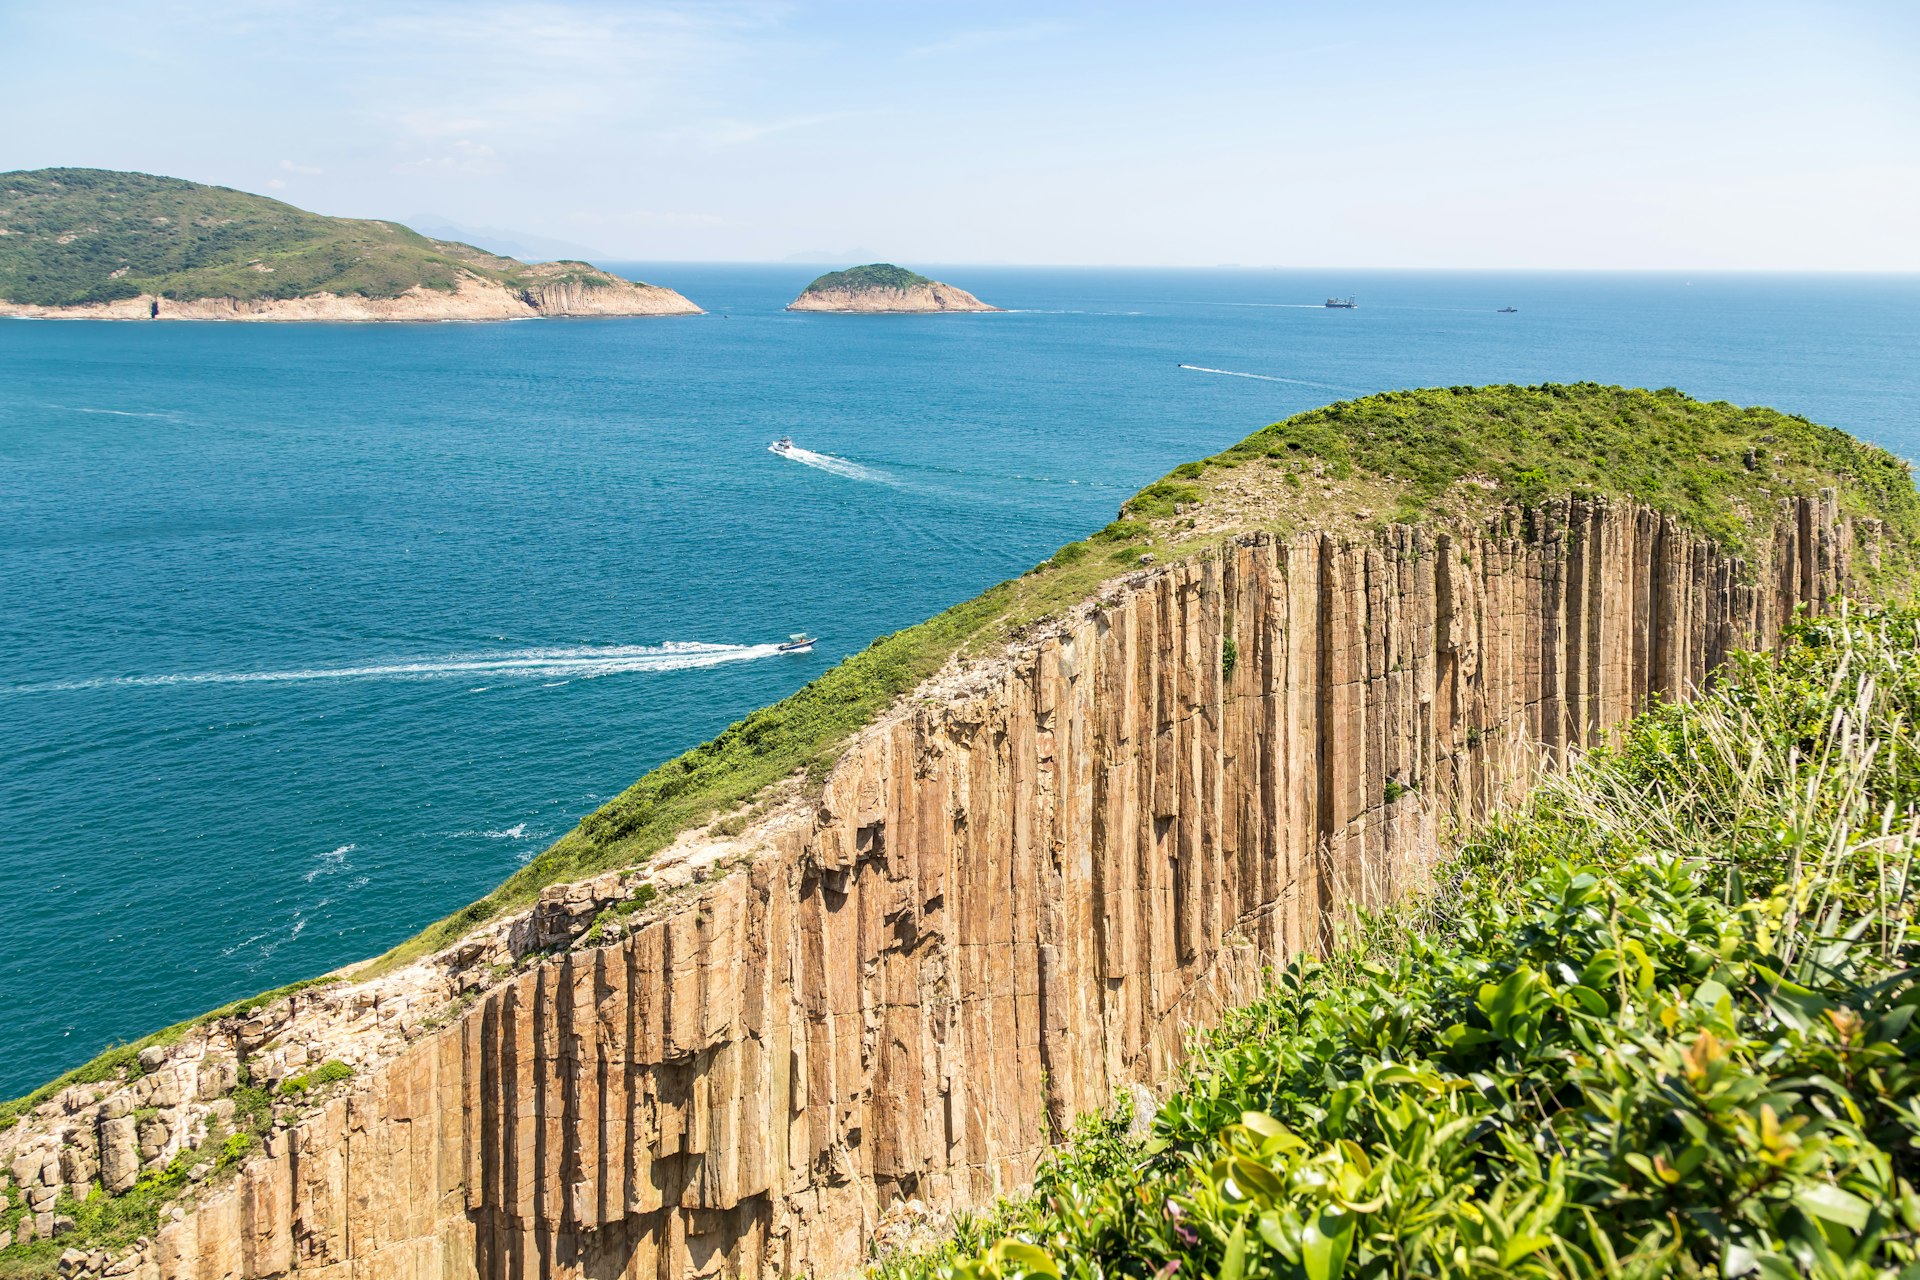 Naturally forming hexagonal rock columns on the coast of Hong Kong Geographical Park, with boats crisscrossing the ocean in the background